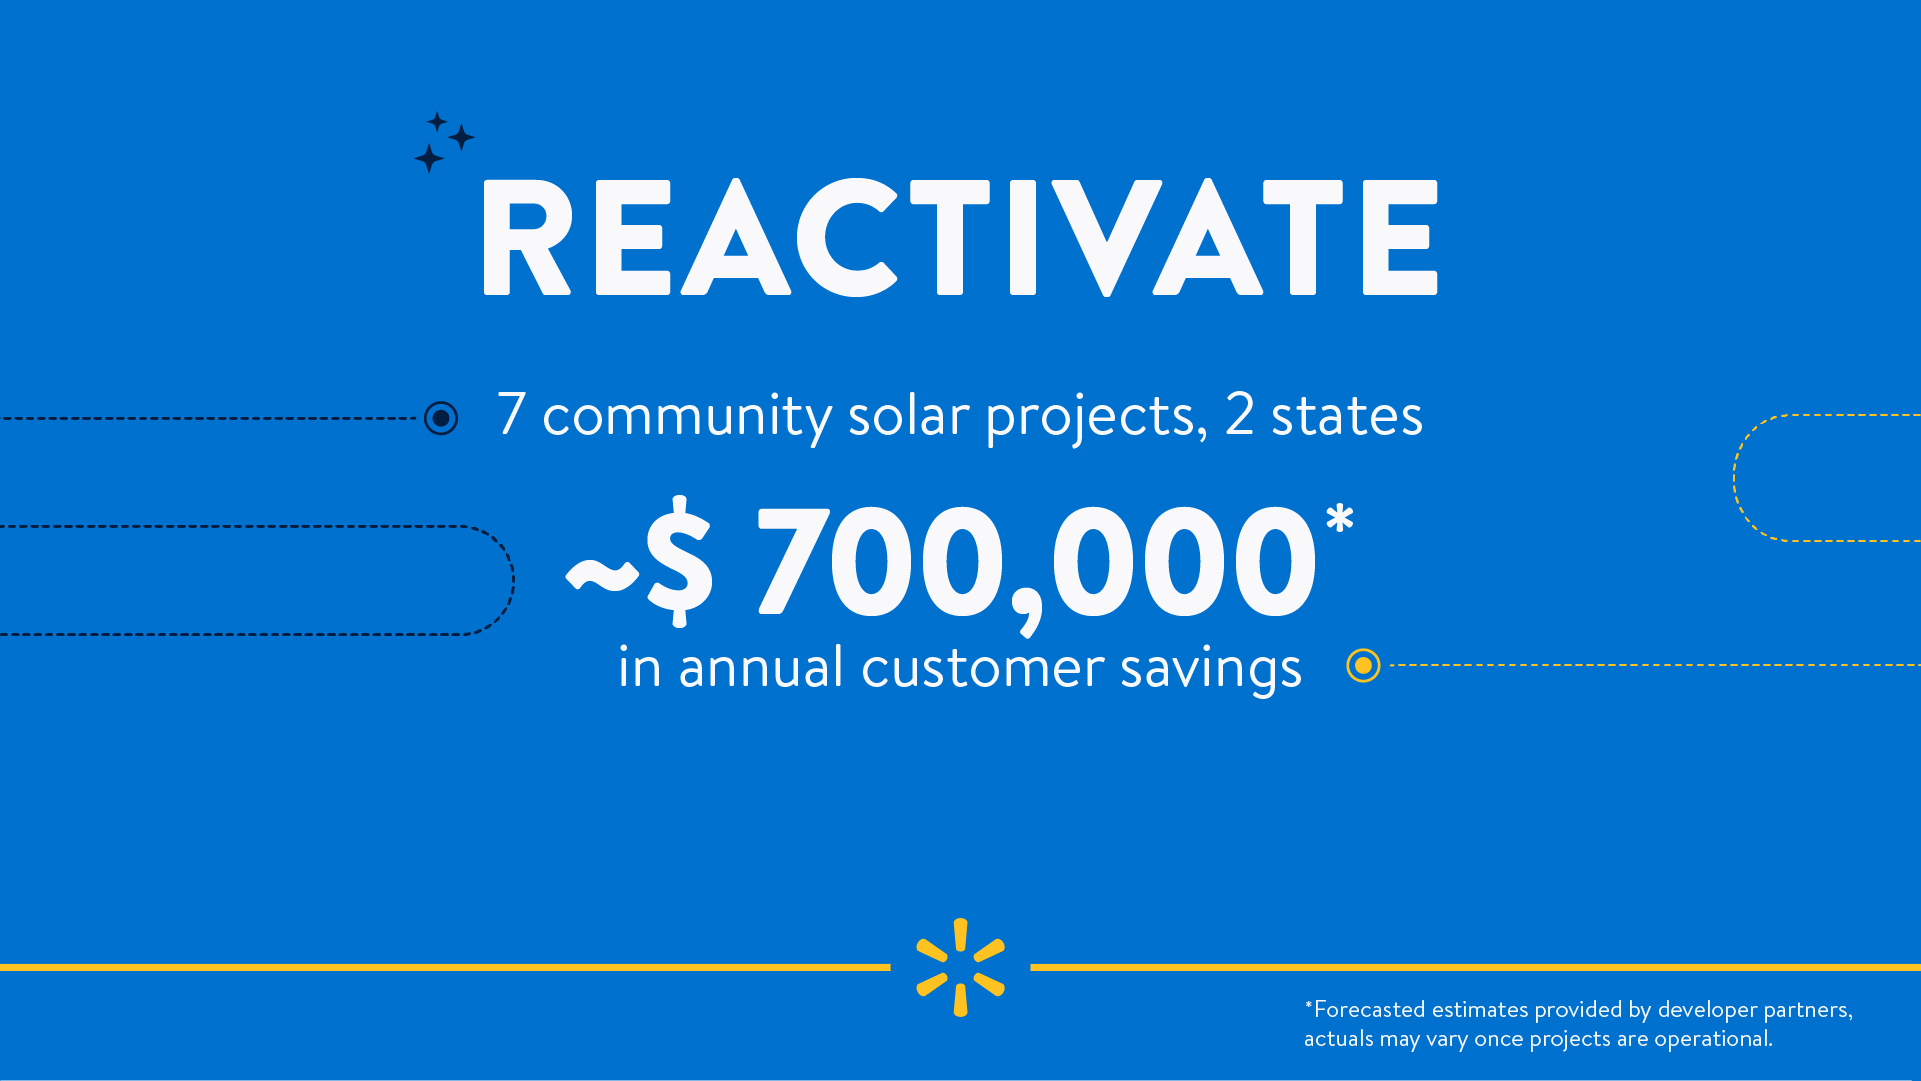 Image reads "Reactivate. 7 community solar projects, 2 states. Approximately $700,000* in annual customer savings. *Forecasted estimates provided by developer partners, actuals may vary once projects are operational."